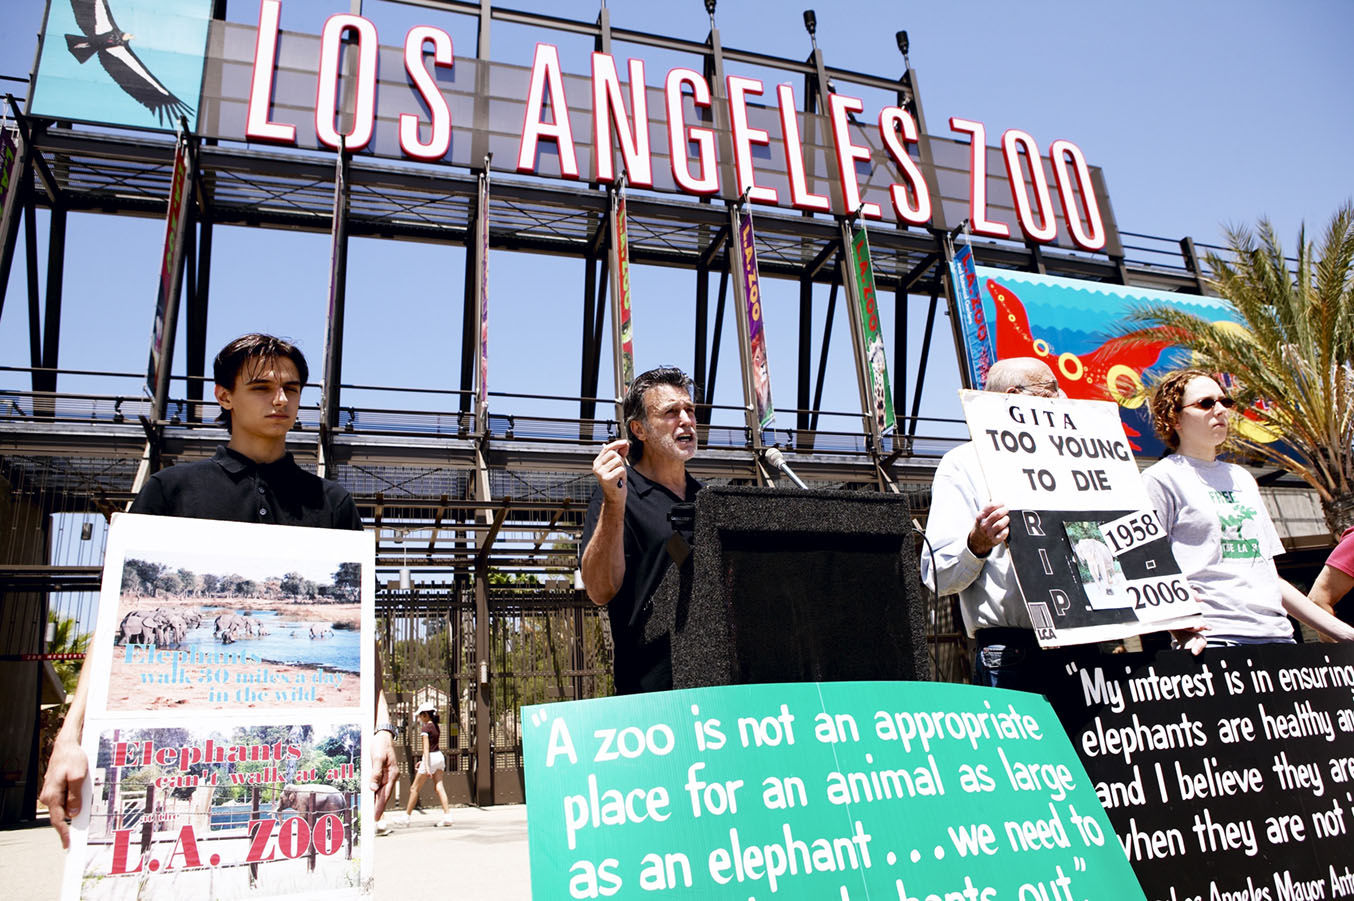 DeRose and LCA protesting outside the LA Zoo in 2006